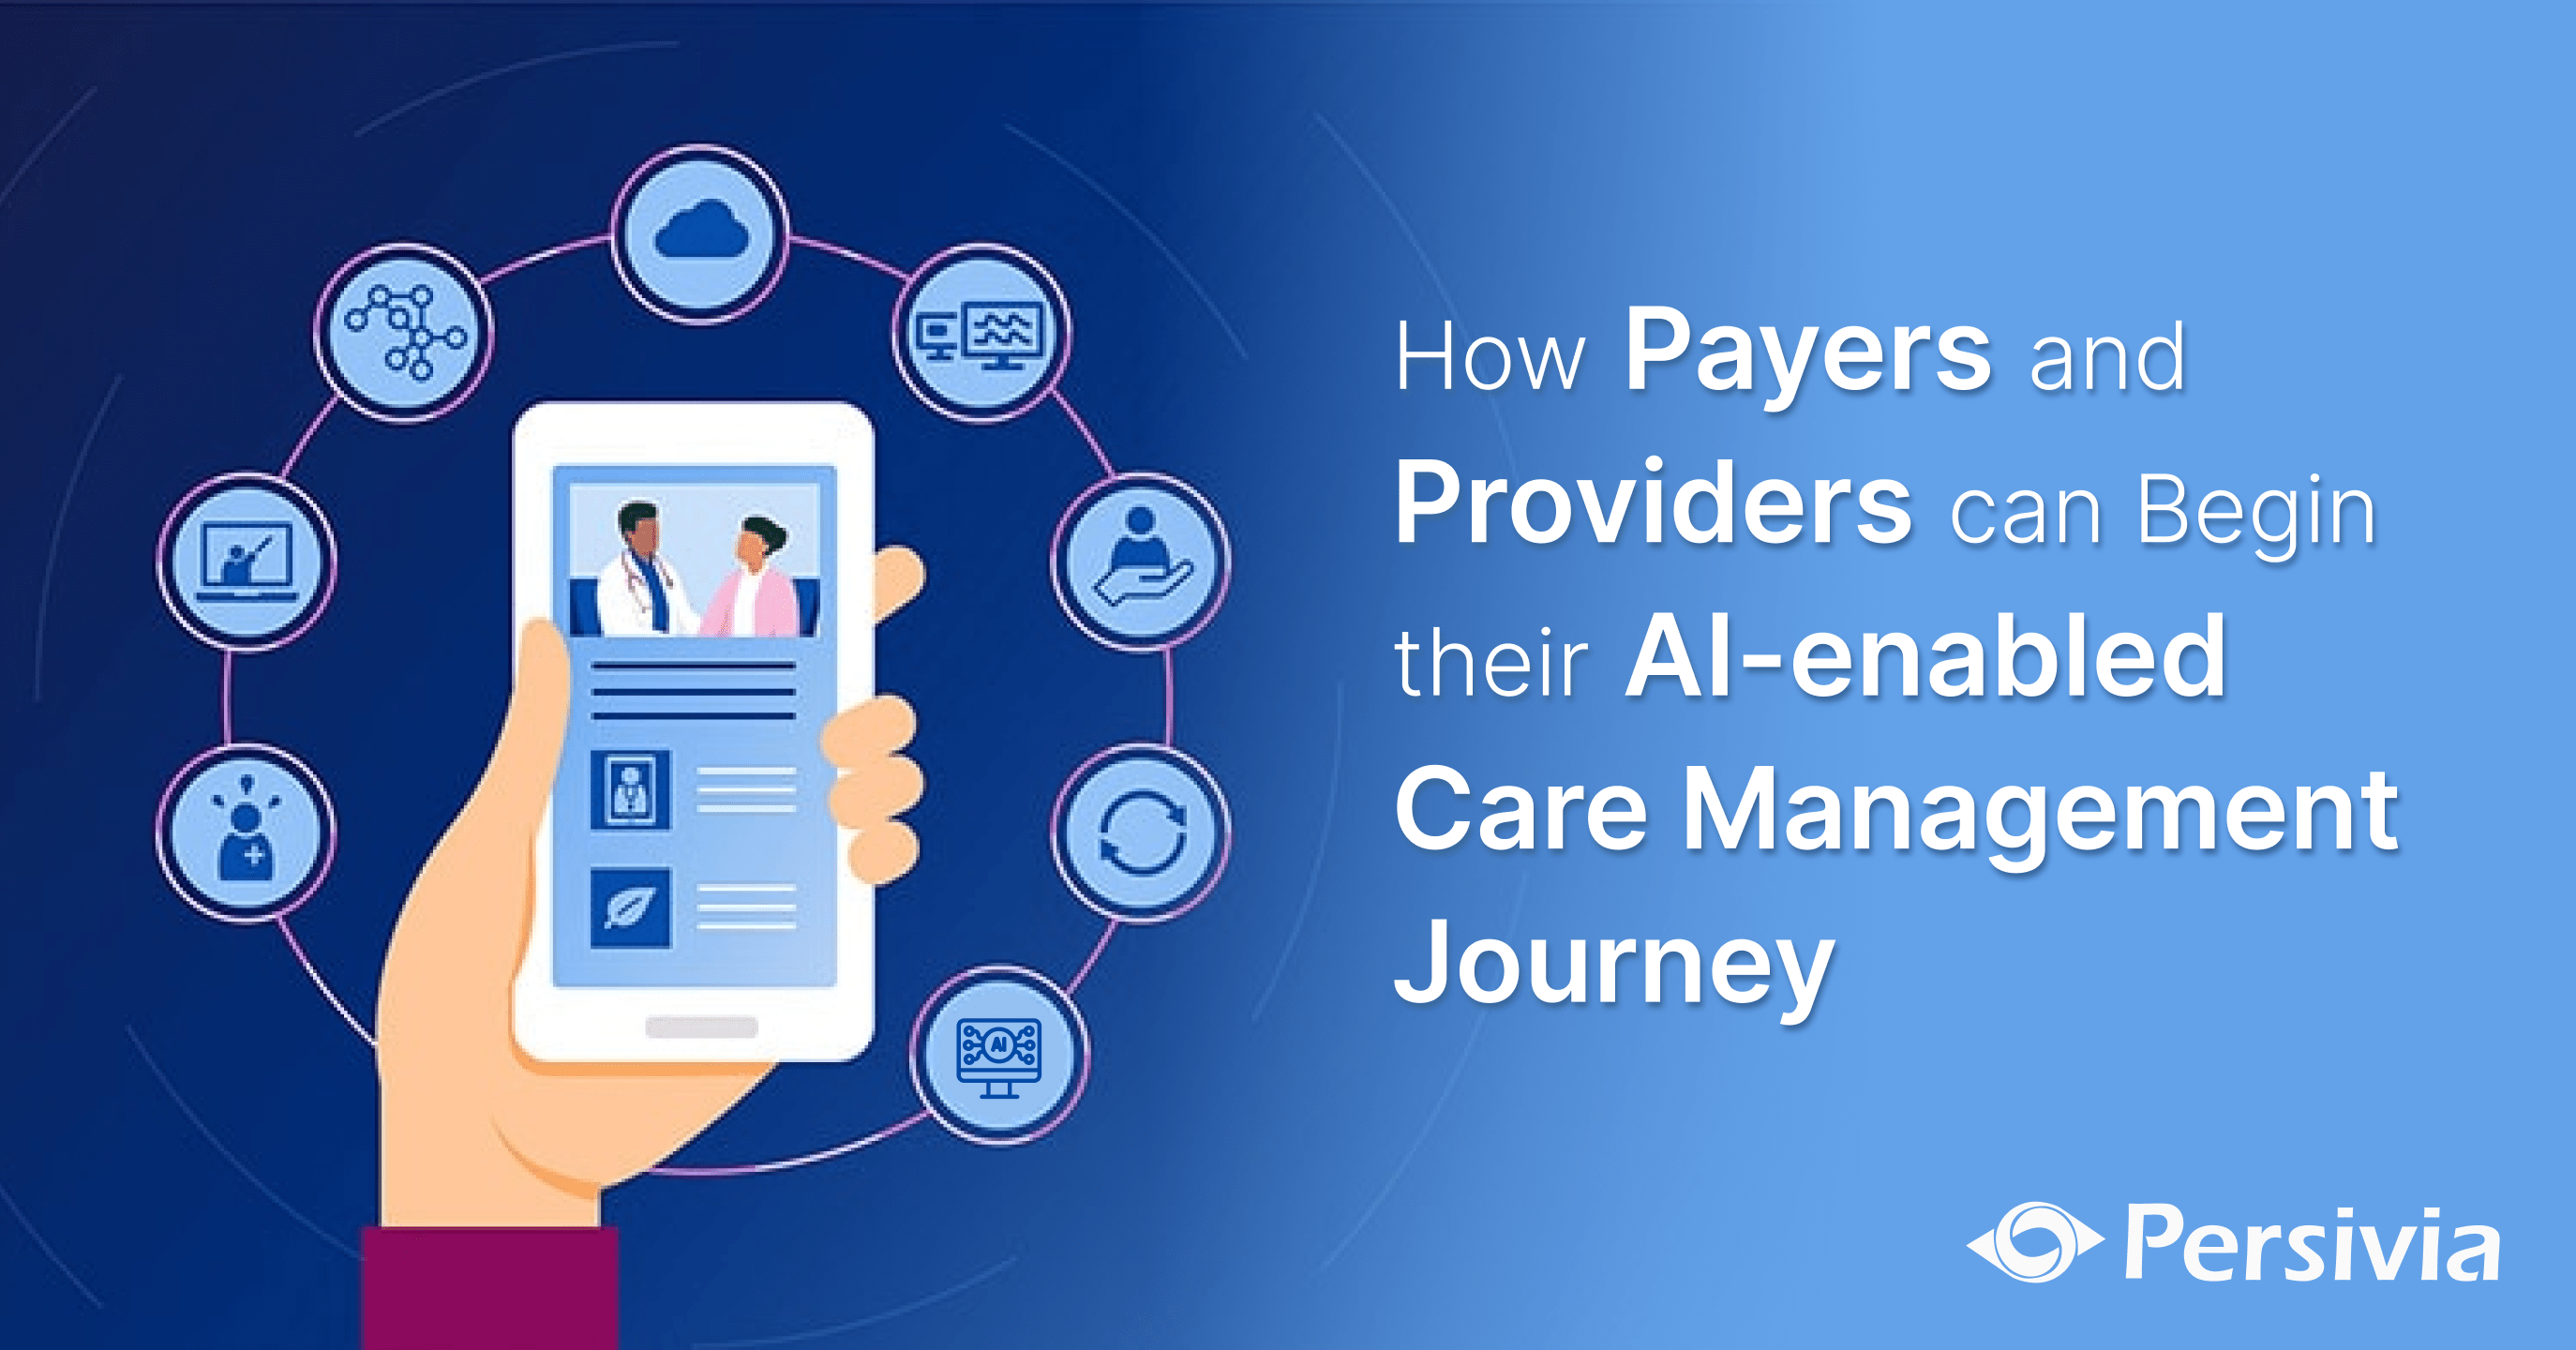 AI-enabled Care Management